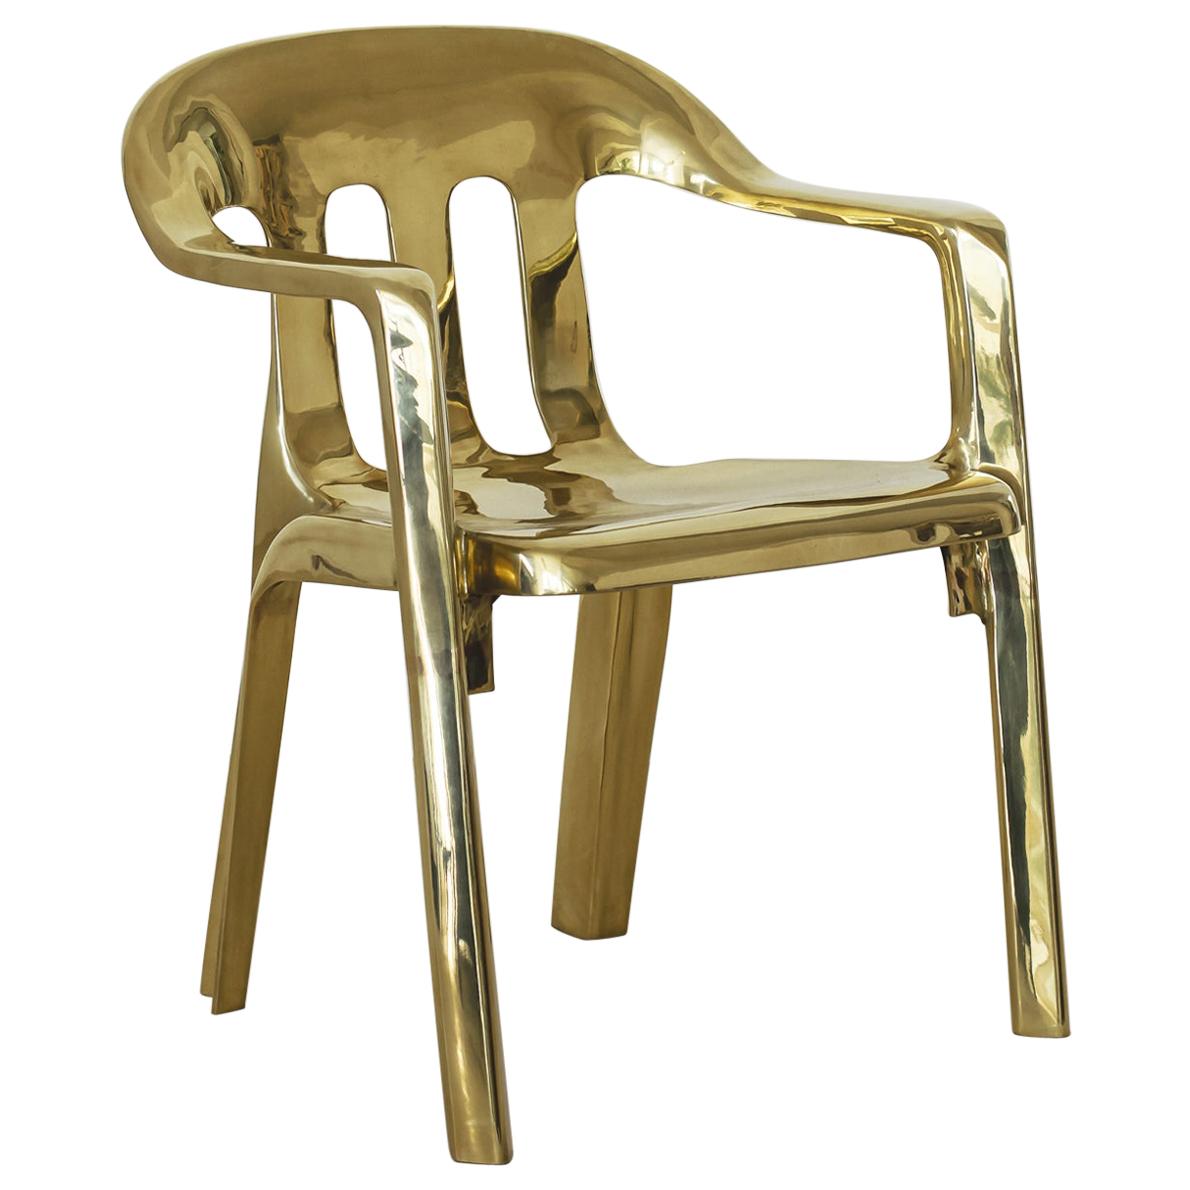 "Monobloco" Contemporary Sculptural Chair in Cast Brass by Estudio Orth For Sale